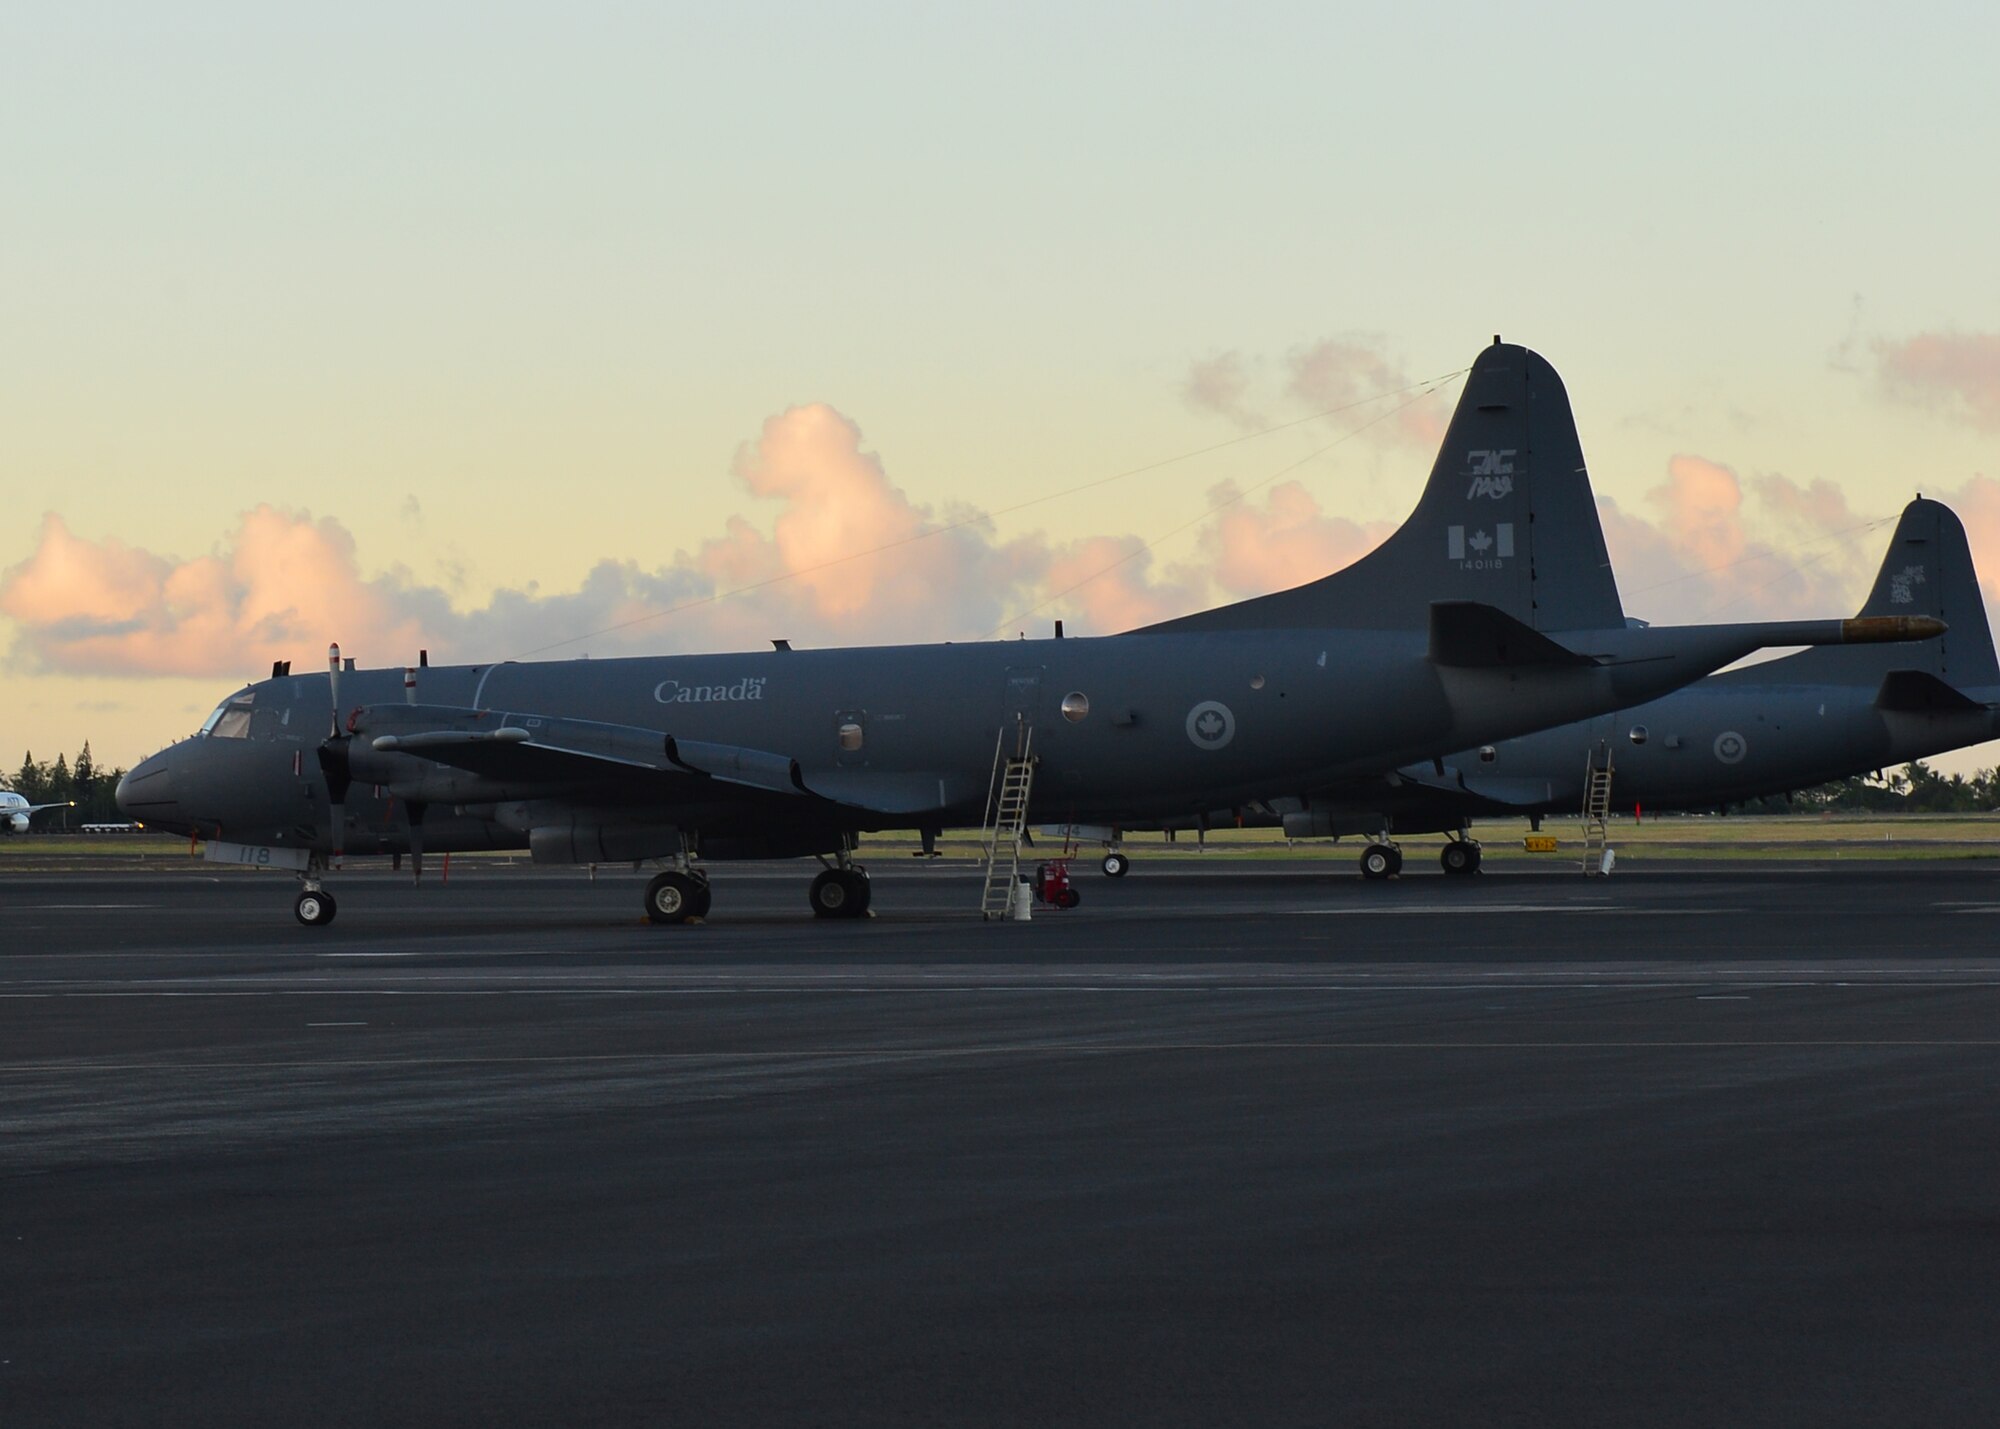 Two CP-140 Aurira aircraft, from the Royal Canadian Air Force, site on the flightline of Joint Base Pearl Harbor-Hickam during the Rim of the Pacific Exercises 11 June, 2016. Twenty-six nations, 49 ships, six submarines, about 200 aircraft, and 25,000 personnel are participating in Rim of the Pacific 2016 from June 29 to Aug. 4 in and around the Hawaiian Islands and Southern California. The world’s largest international maritime exercise, RIMPAC provides a unique training opportunity while fostering and sustaining cooperative relationships between participants critical to ensuring the safety of sea lanes and security on the world’s oceans. RIMPAC 16 is the 25th exercise in the series that began in 1971. (U.S. Air Force photo by Tech. Sgt. Aaron Oelrich) 